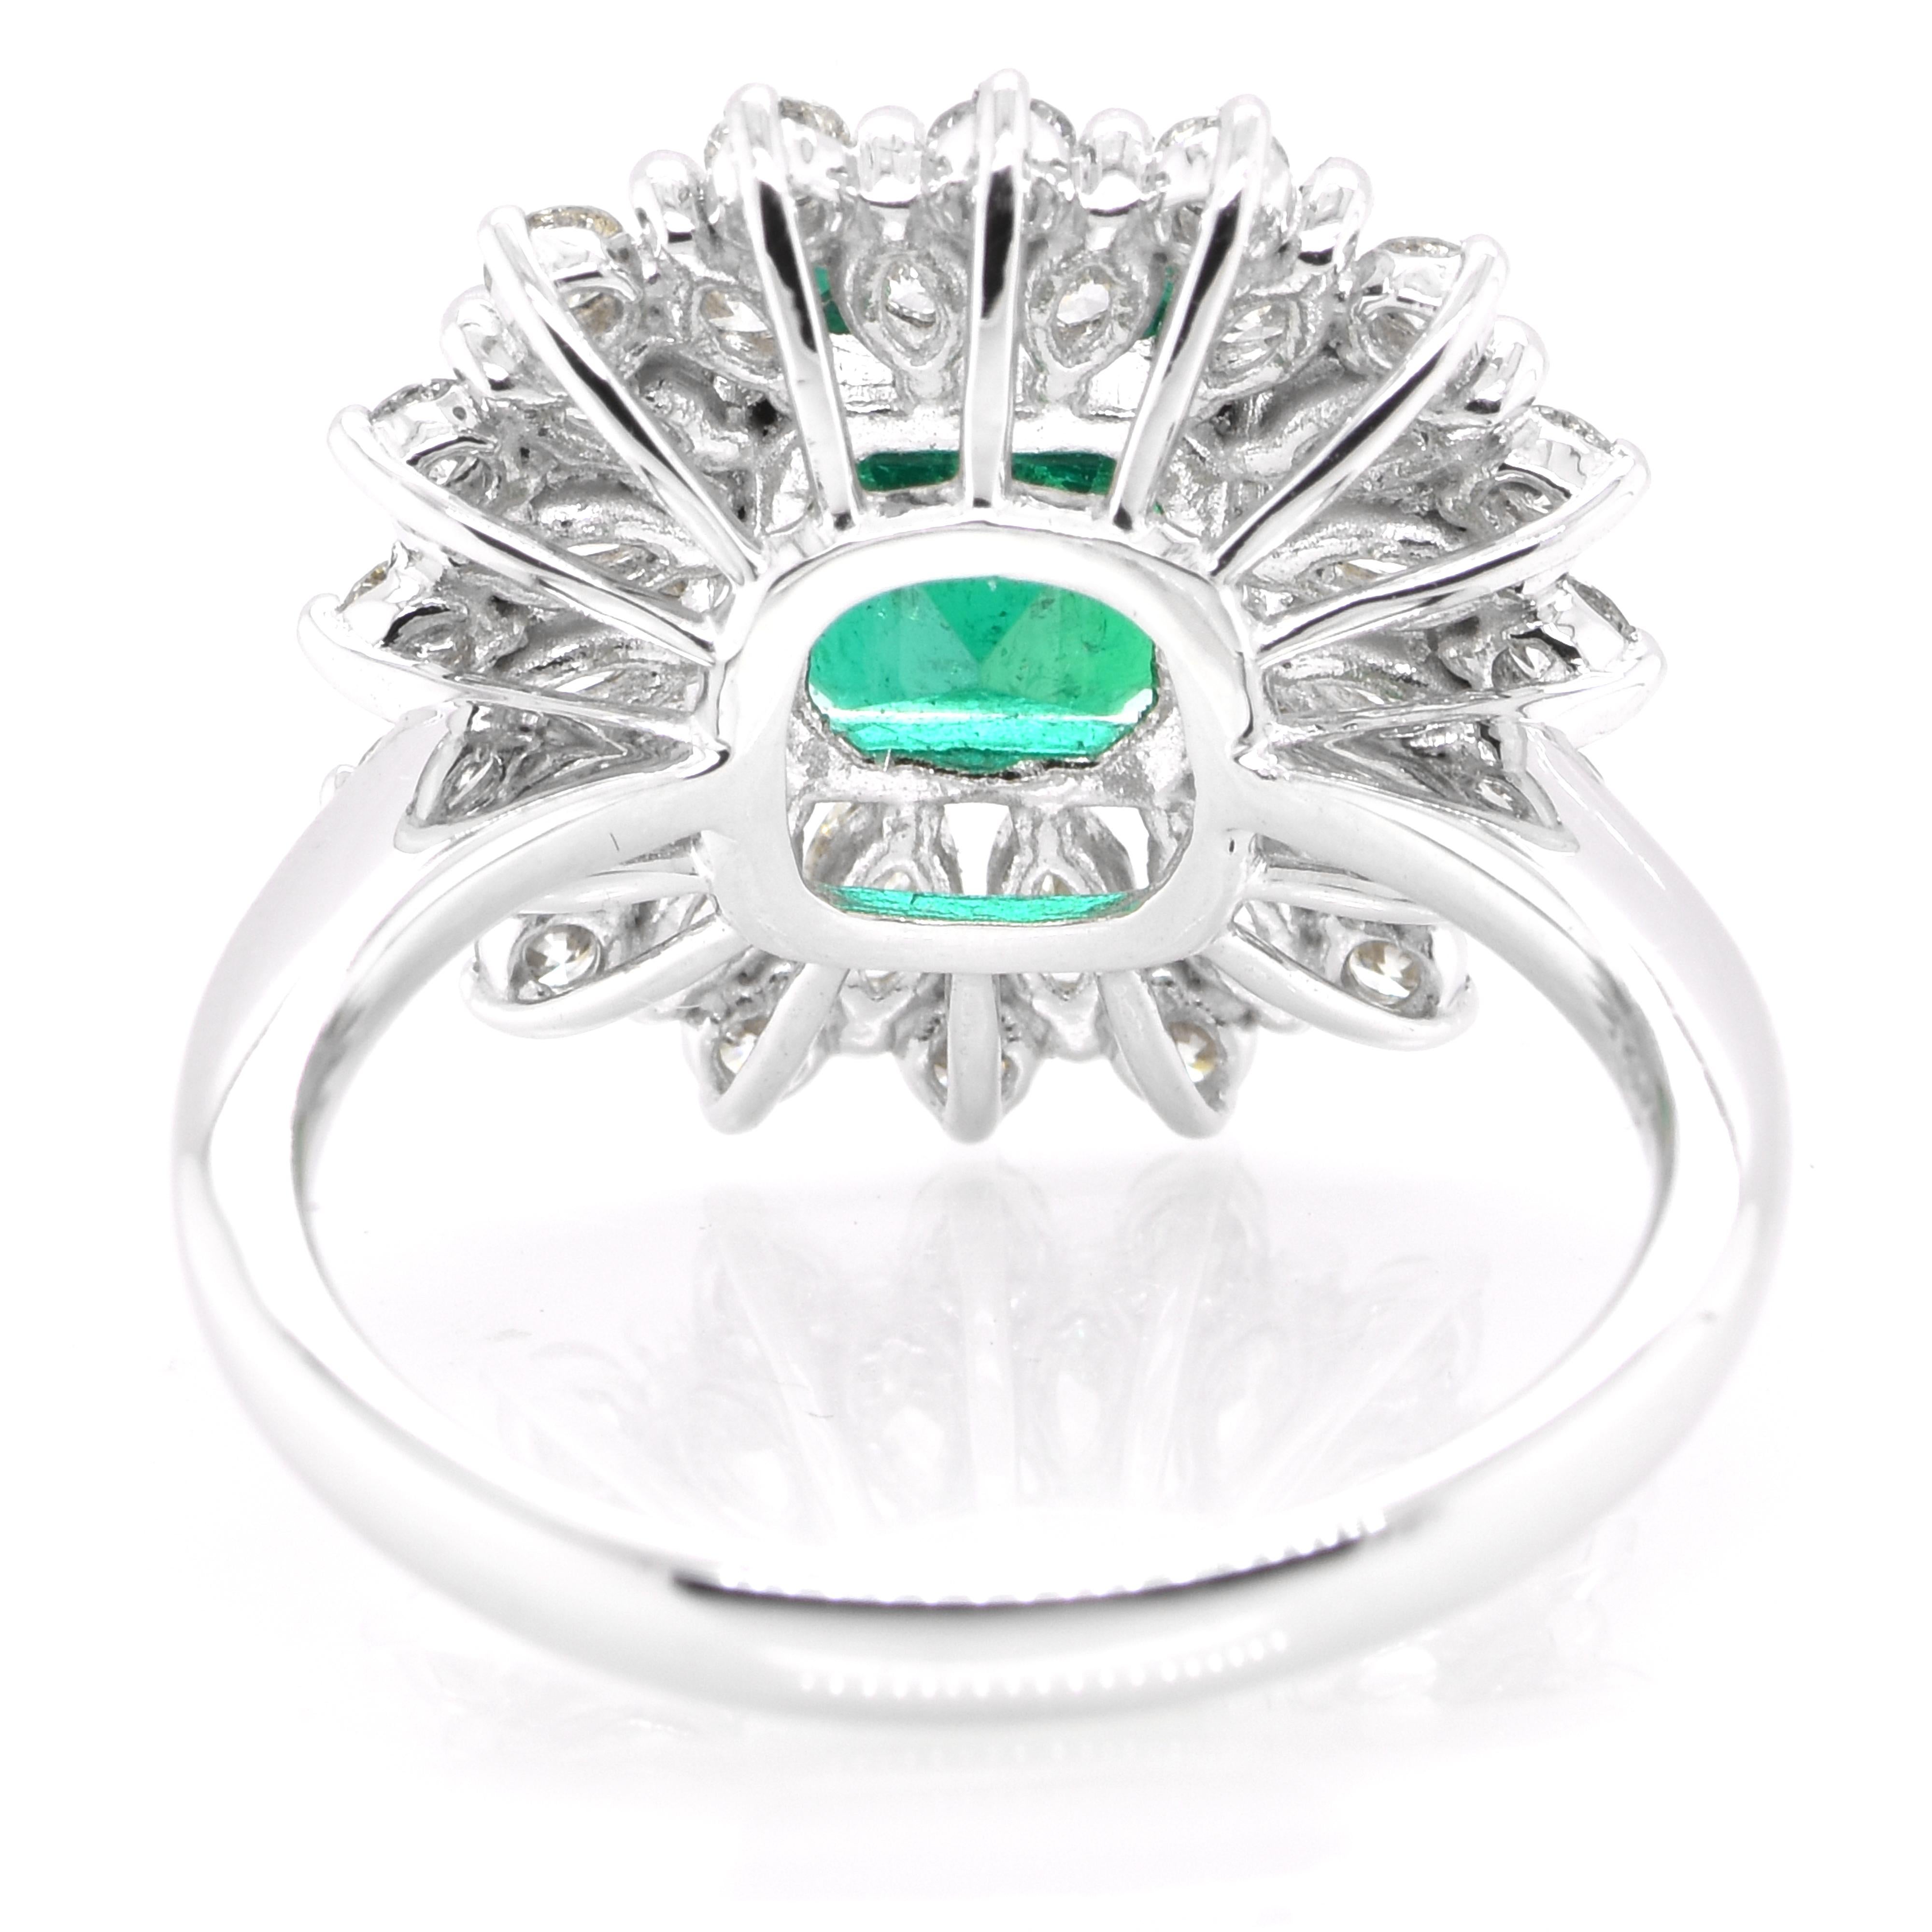 Modern 1.51 Carat Vivid Green, Colombian Emerald and Diamond Ring Set in Platinum For Sale